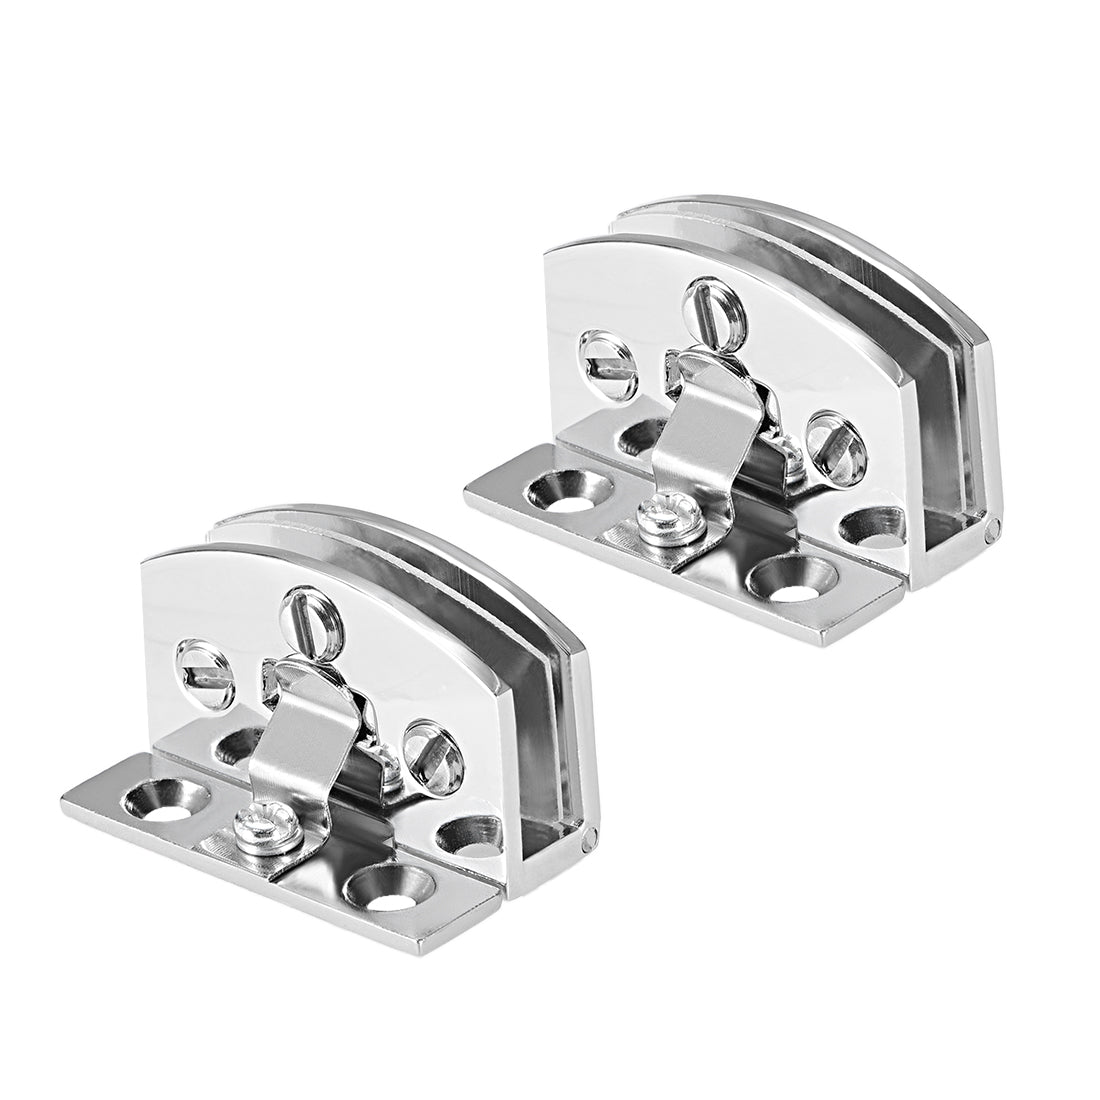 uxcell Uxcell Glass Door Hinge Cupboard Showcase Cabinet Door Hinge Glass Clamp Zinc Alloy for 5 - 8mm Glass Thickness 2pcs